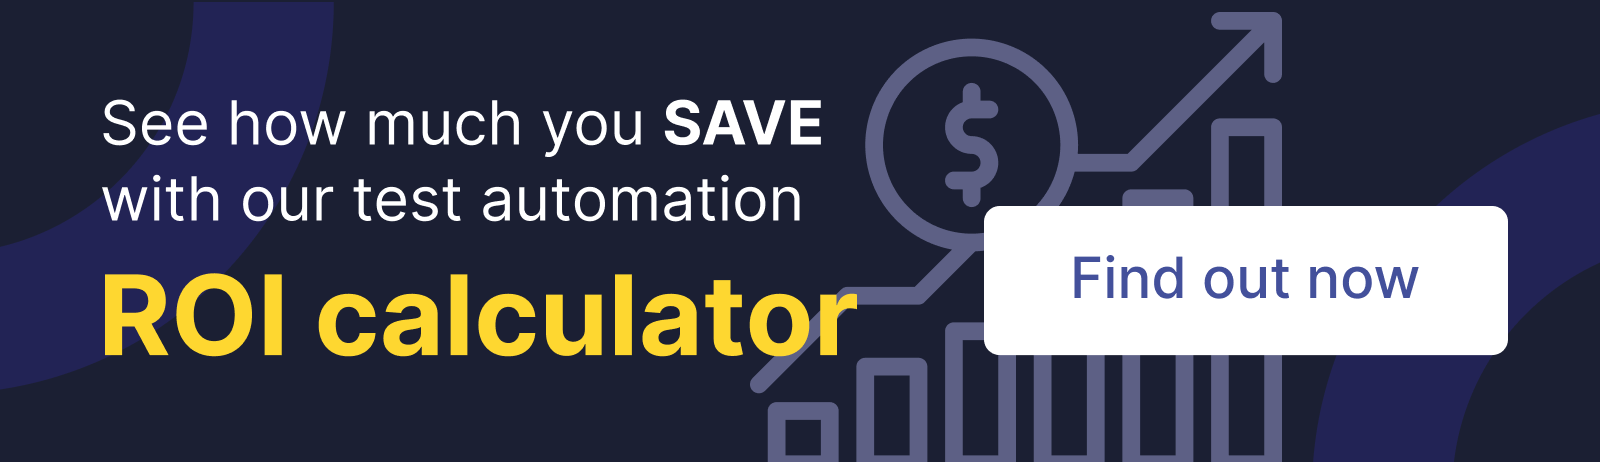 Mobile apps fuel the digital transformation - See how much you save with Katalon's test automation ROI calculator